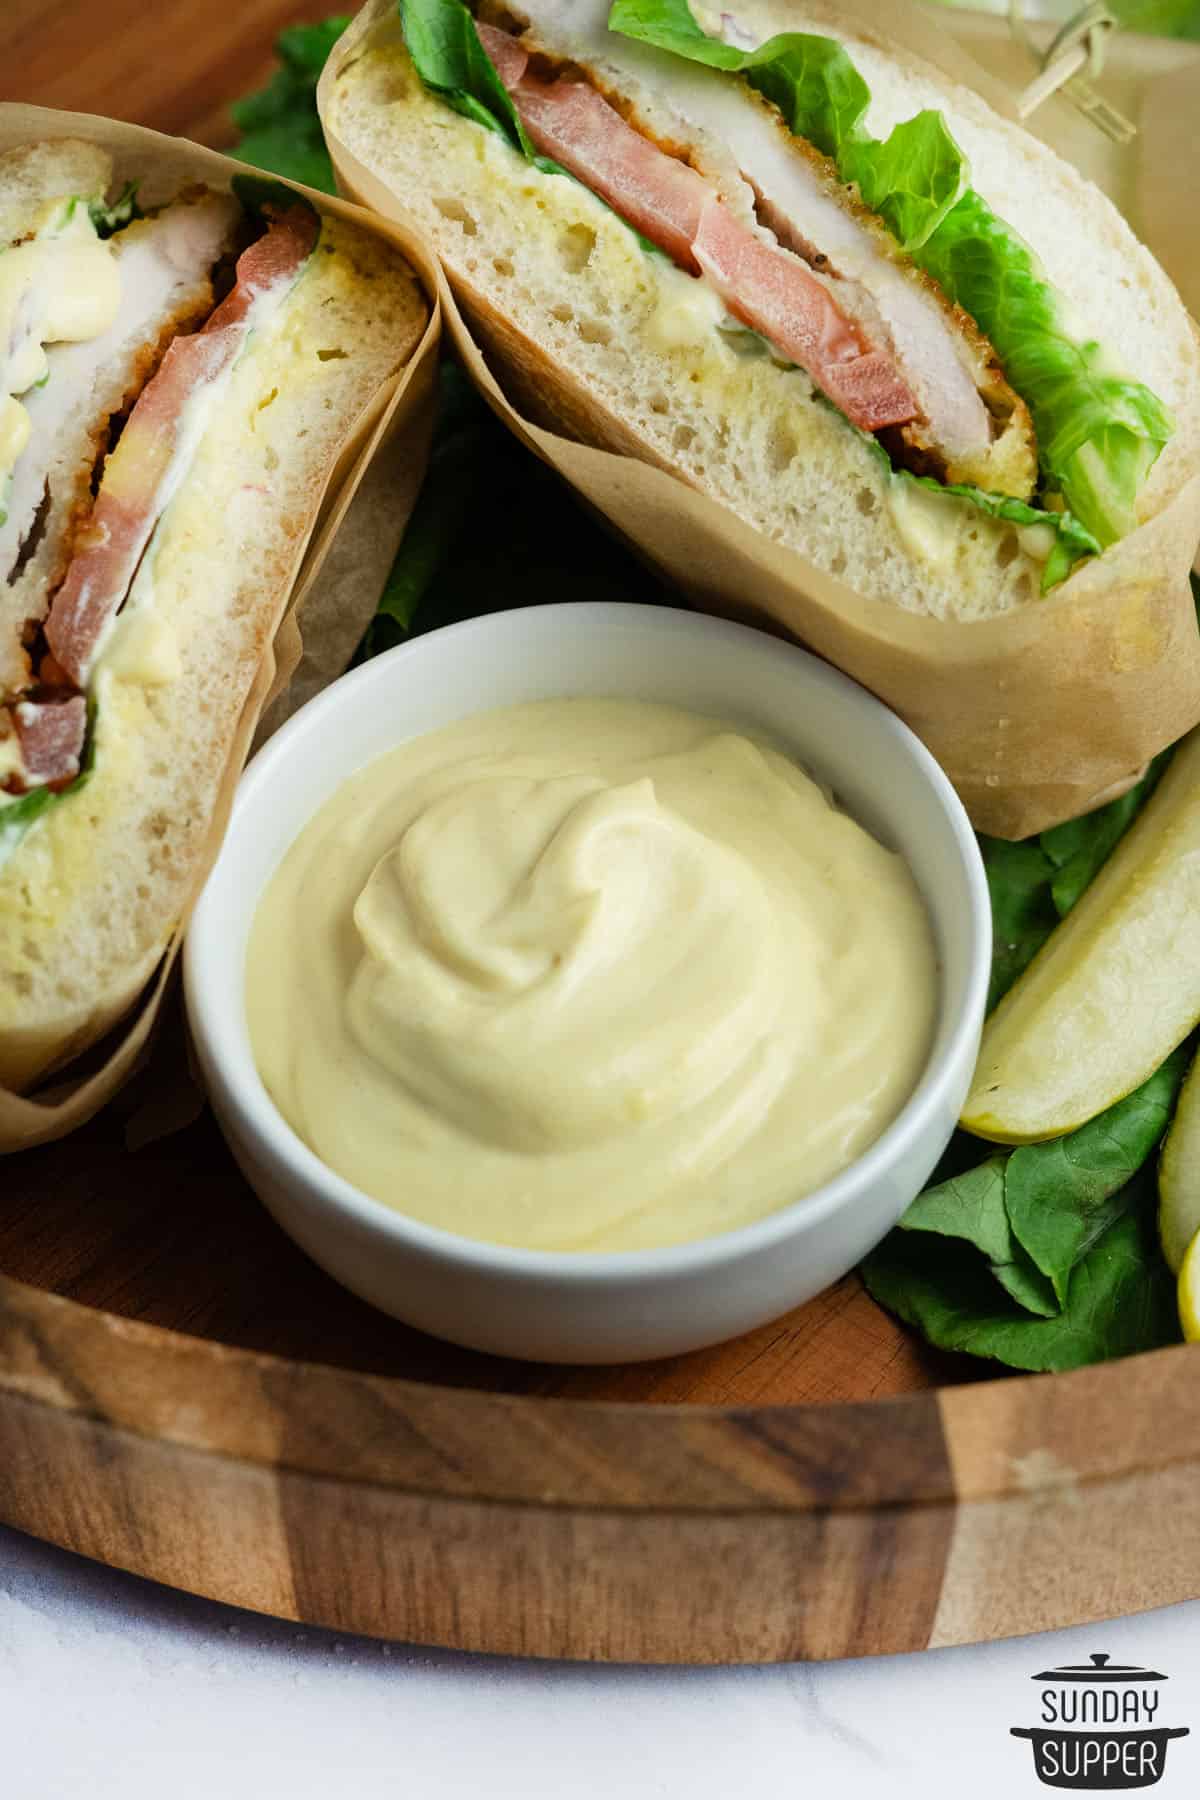 mayo mustard sauce with a sandwich in the background